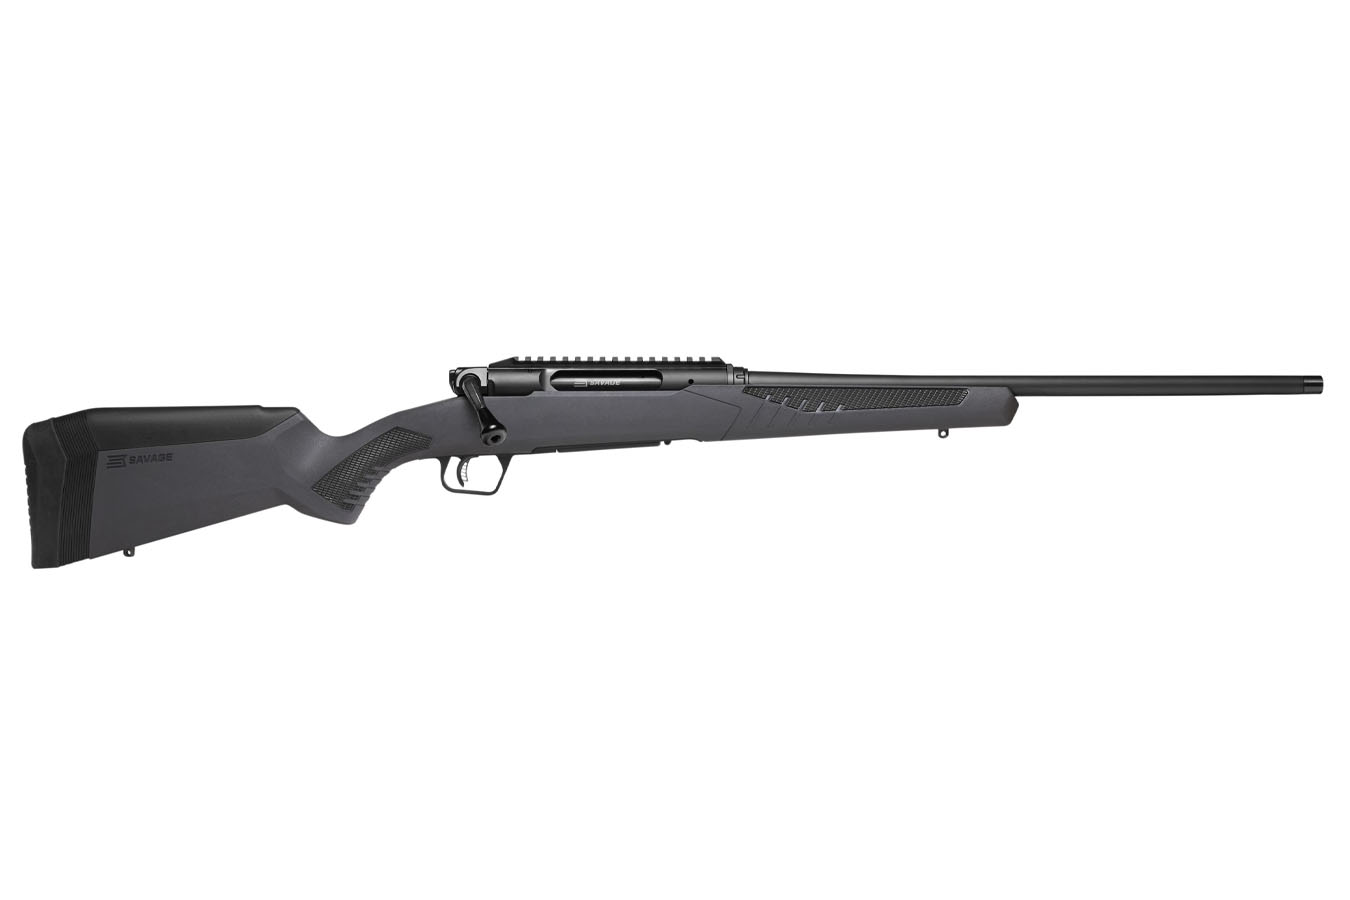 No. 40 Best Selling: SAVAGE IMPLUSE DRIVEN HUNTER 308 WIN 18 IN BBL BLACK 